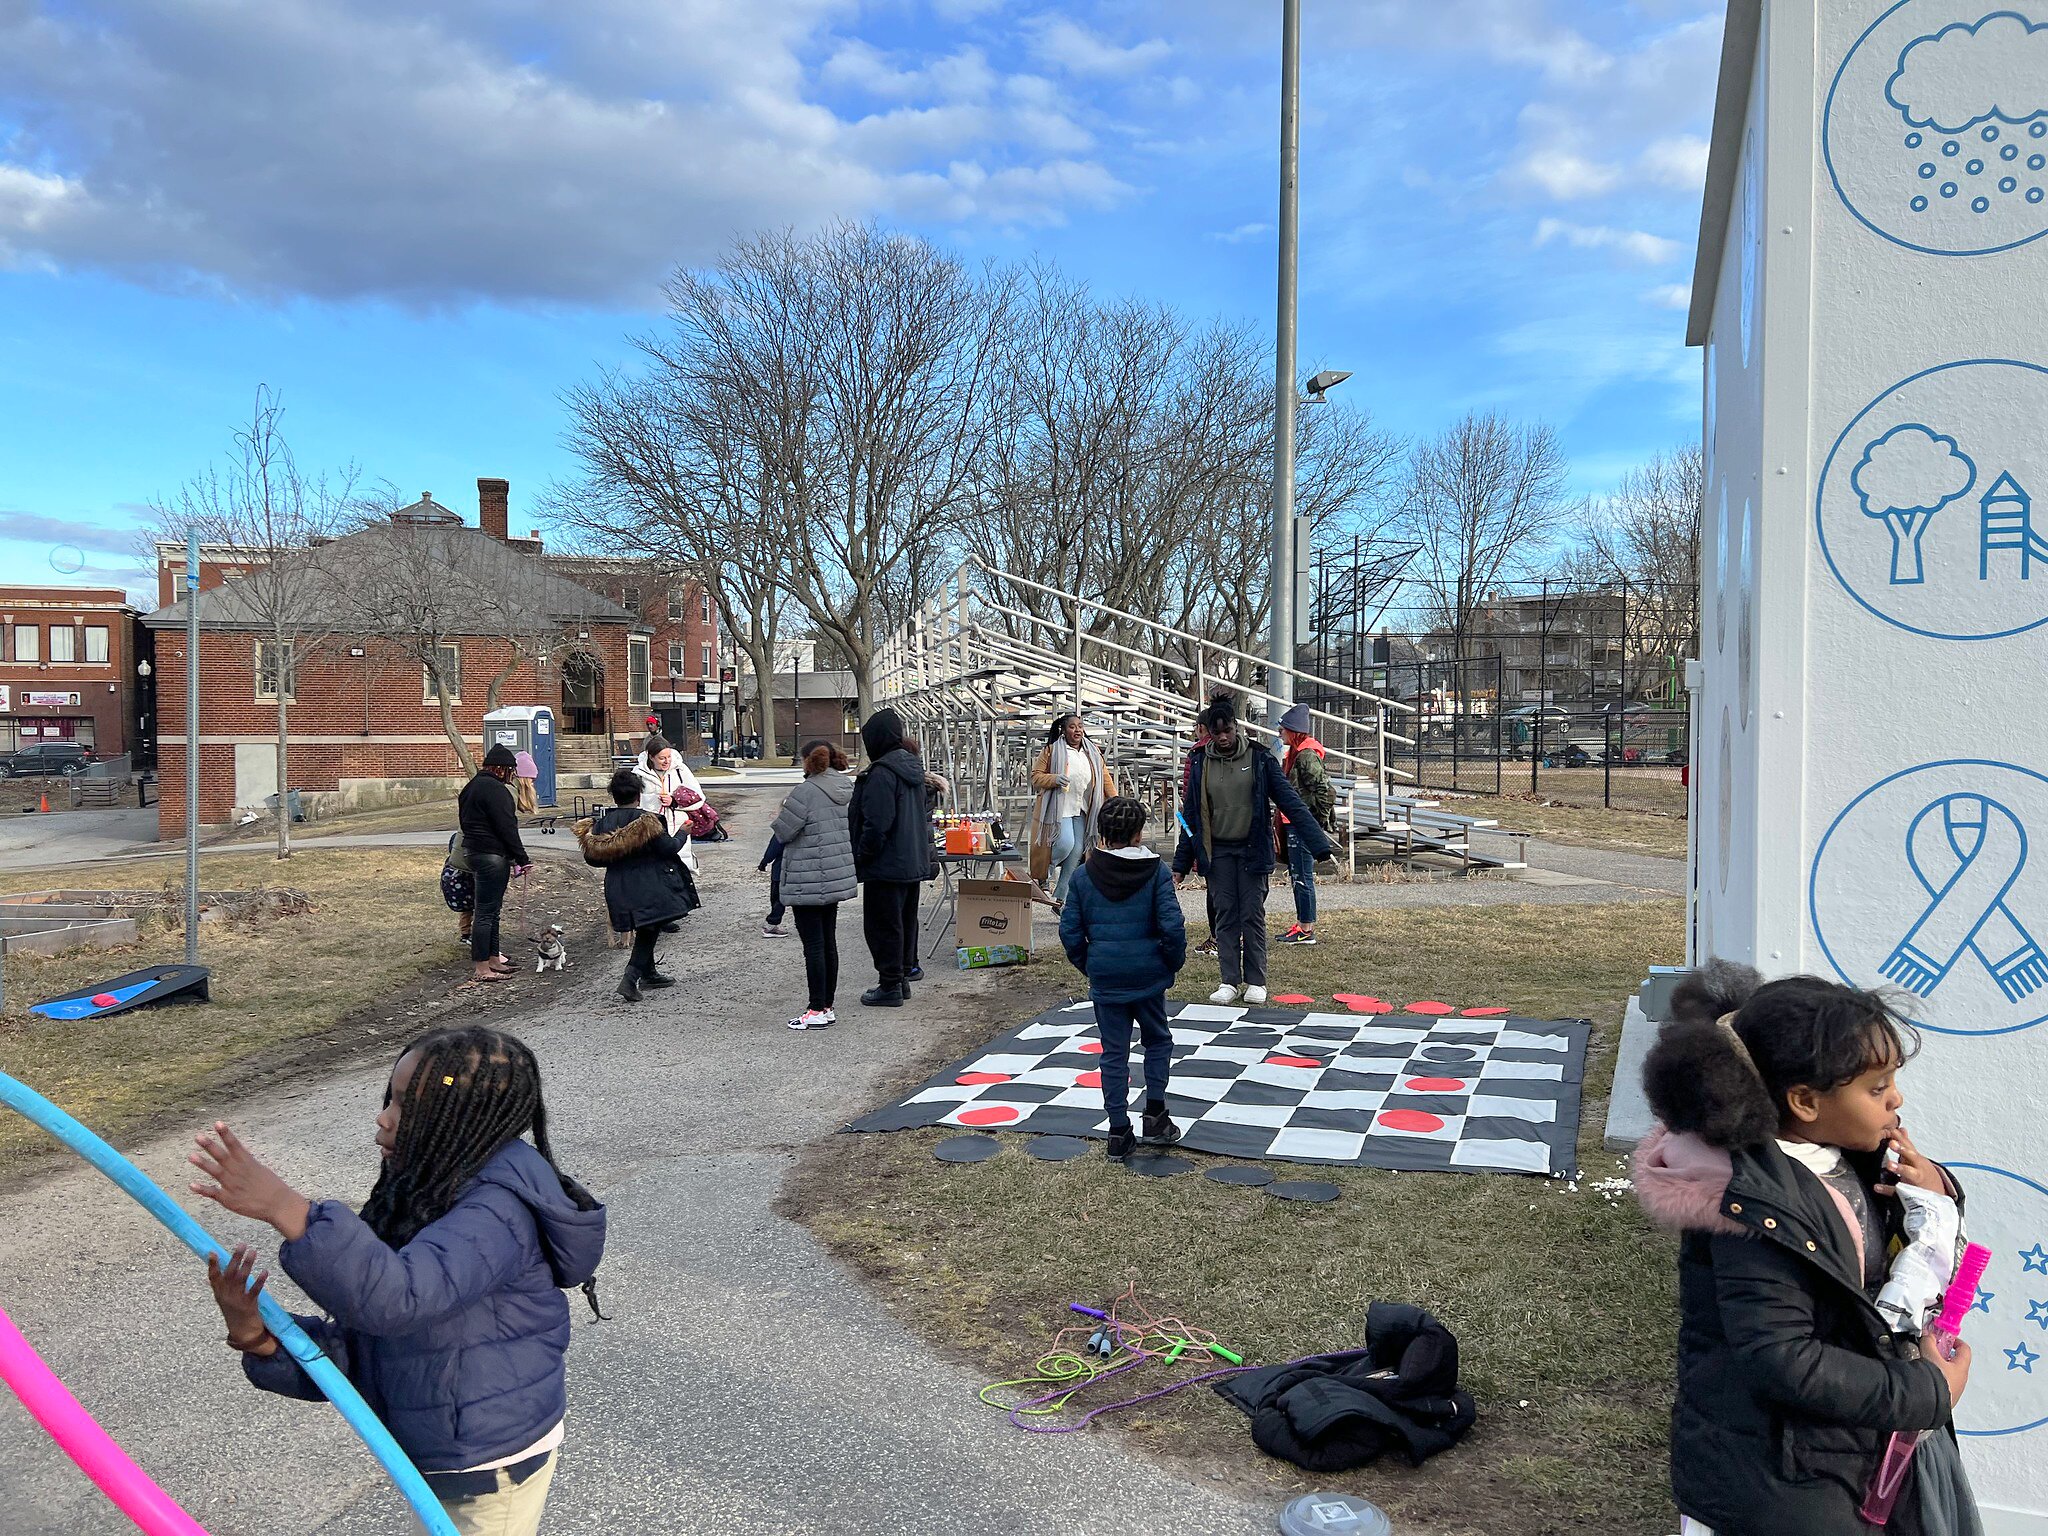 People and children standing around playing games and eating snacks. Giant checkers on the ground next to the new play shed.